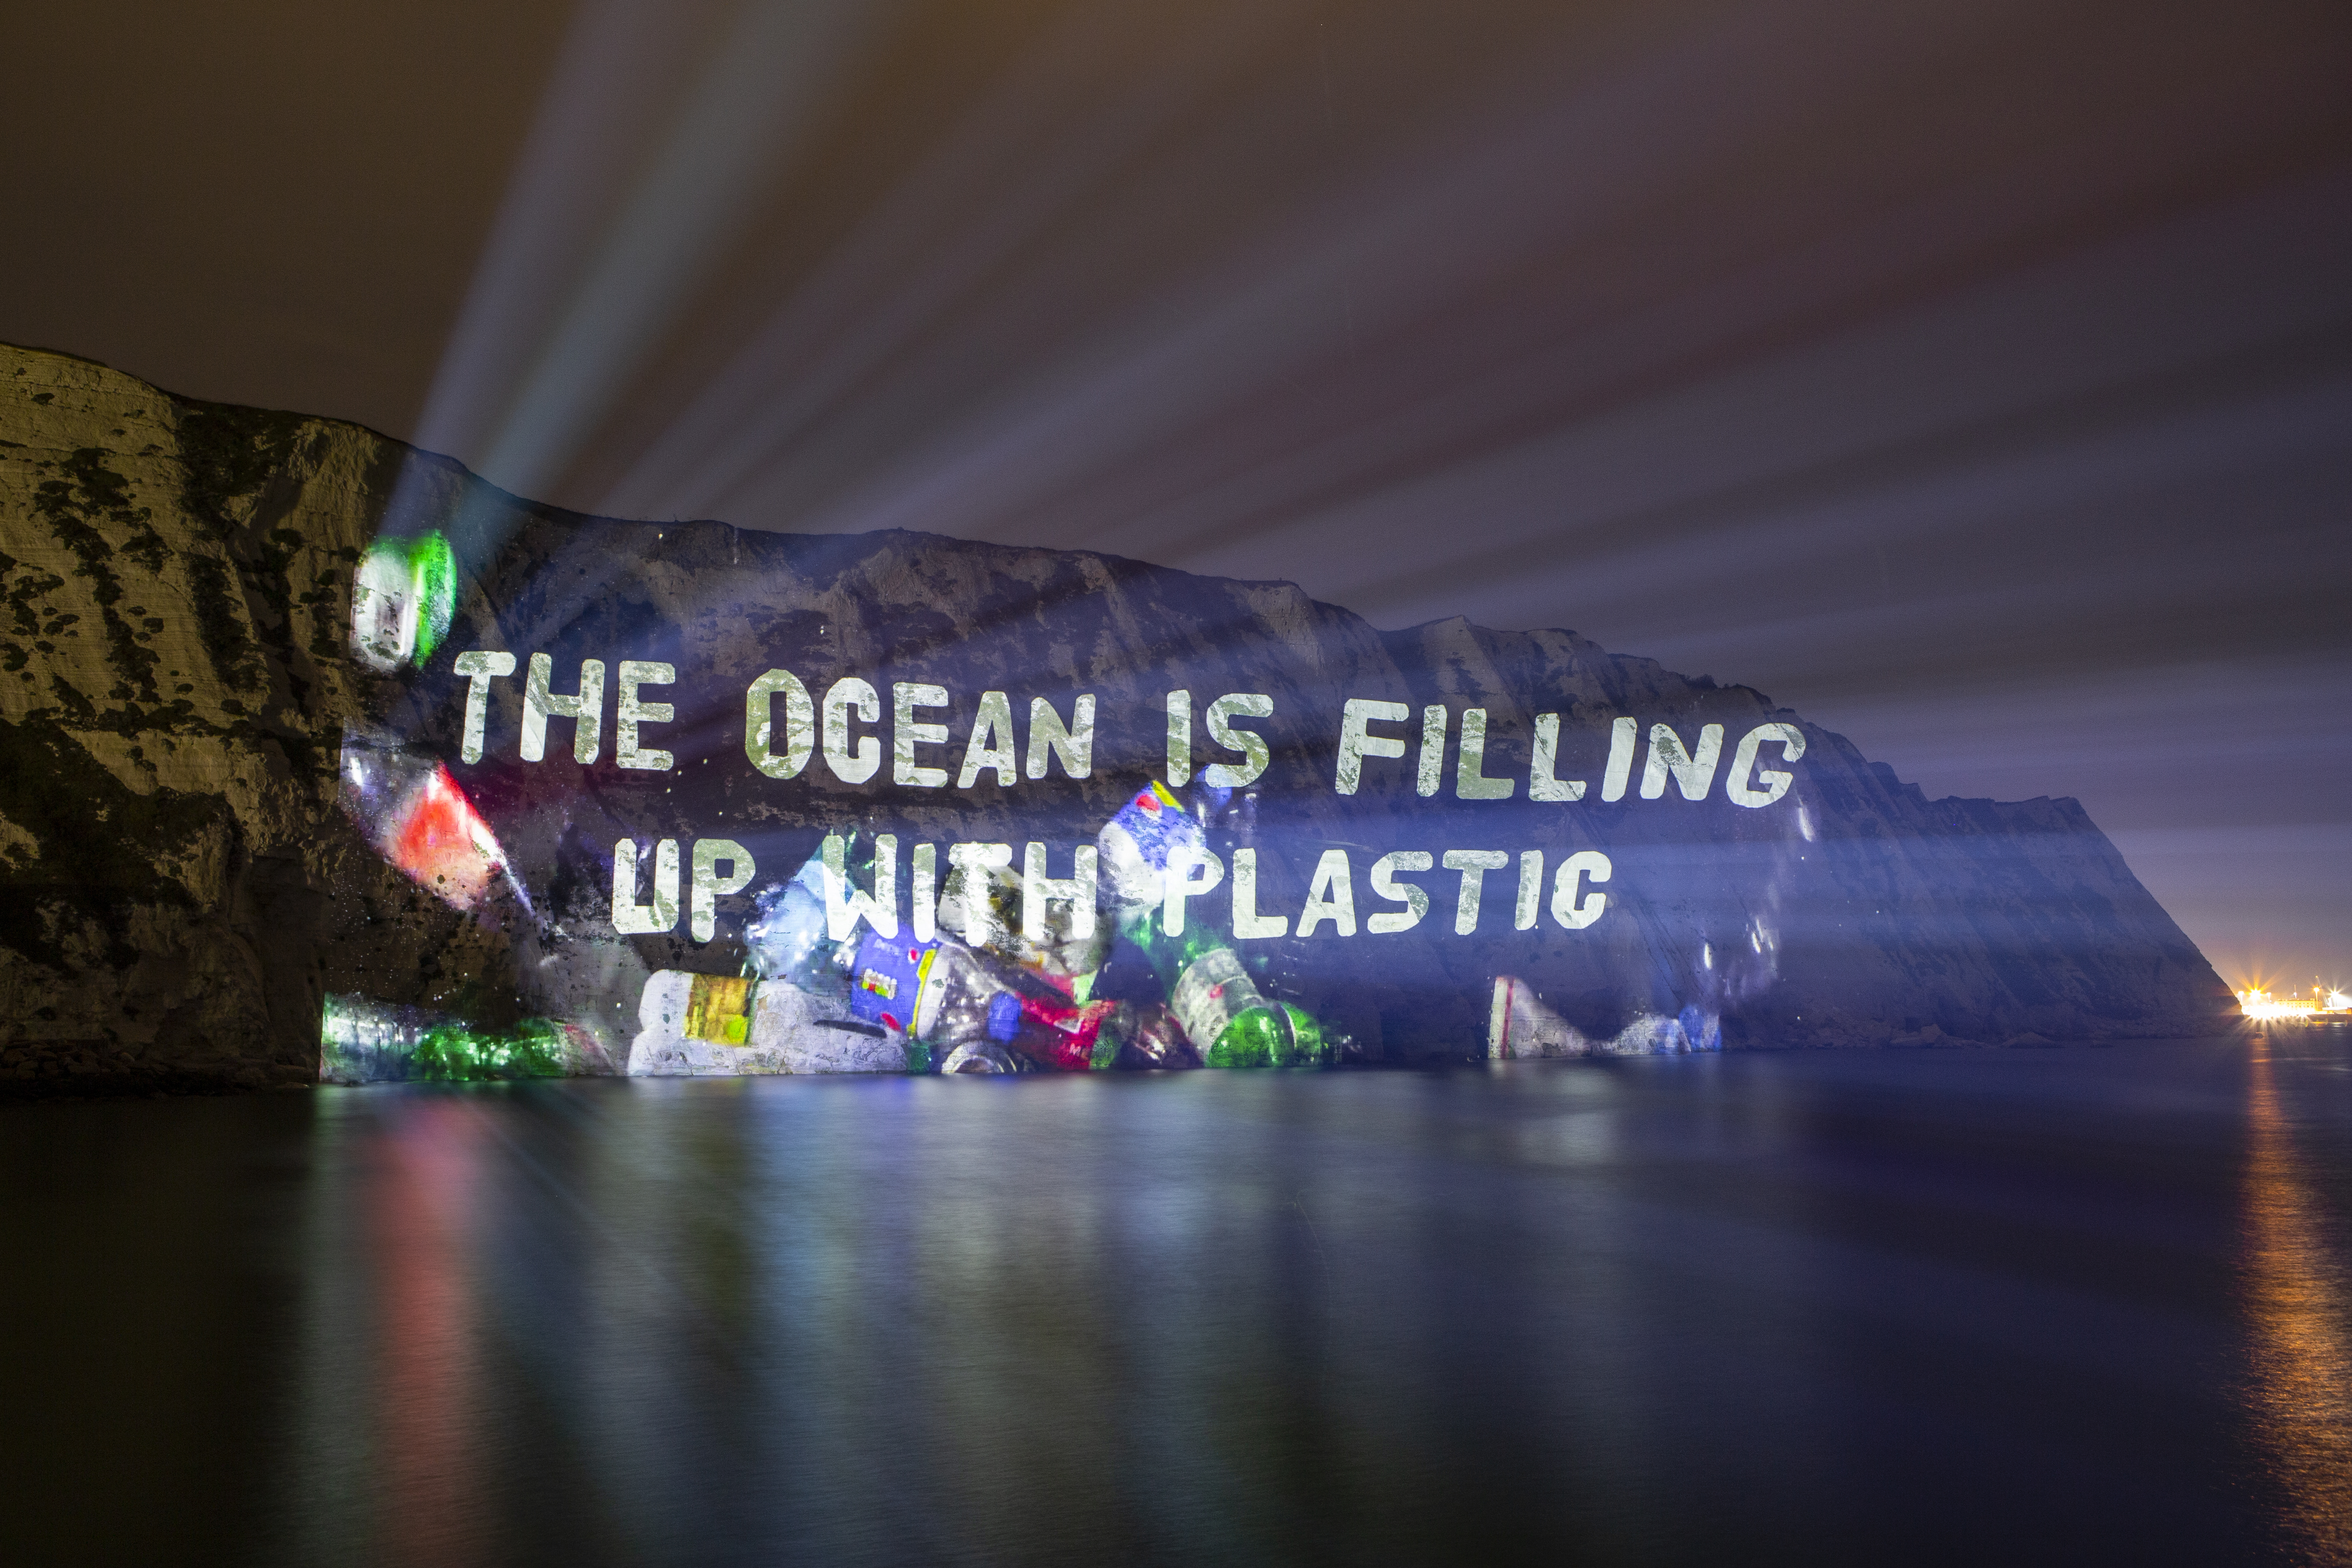 An image of litter and message saying the ocean is filling up with plastic projected onto the White Cliffs of Dover